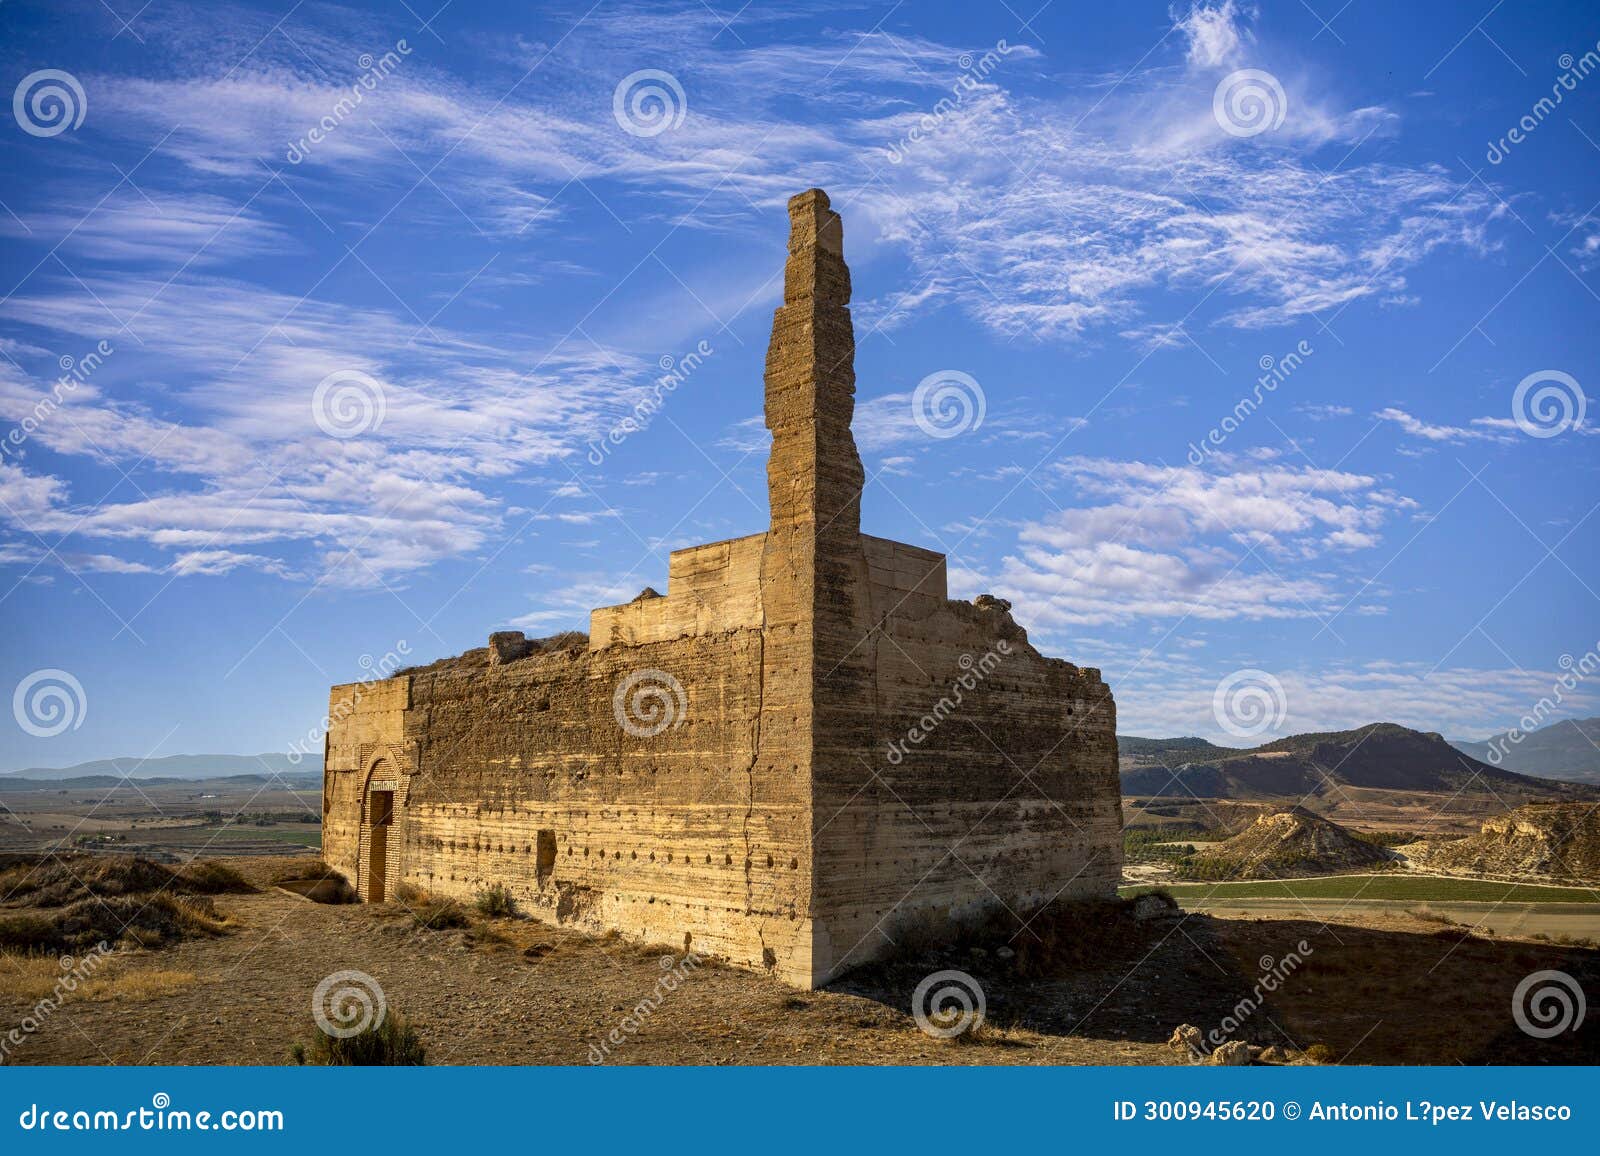 remains of alcal castle on top of a hill in mula, region of murcia, spain